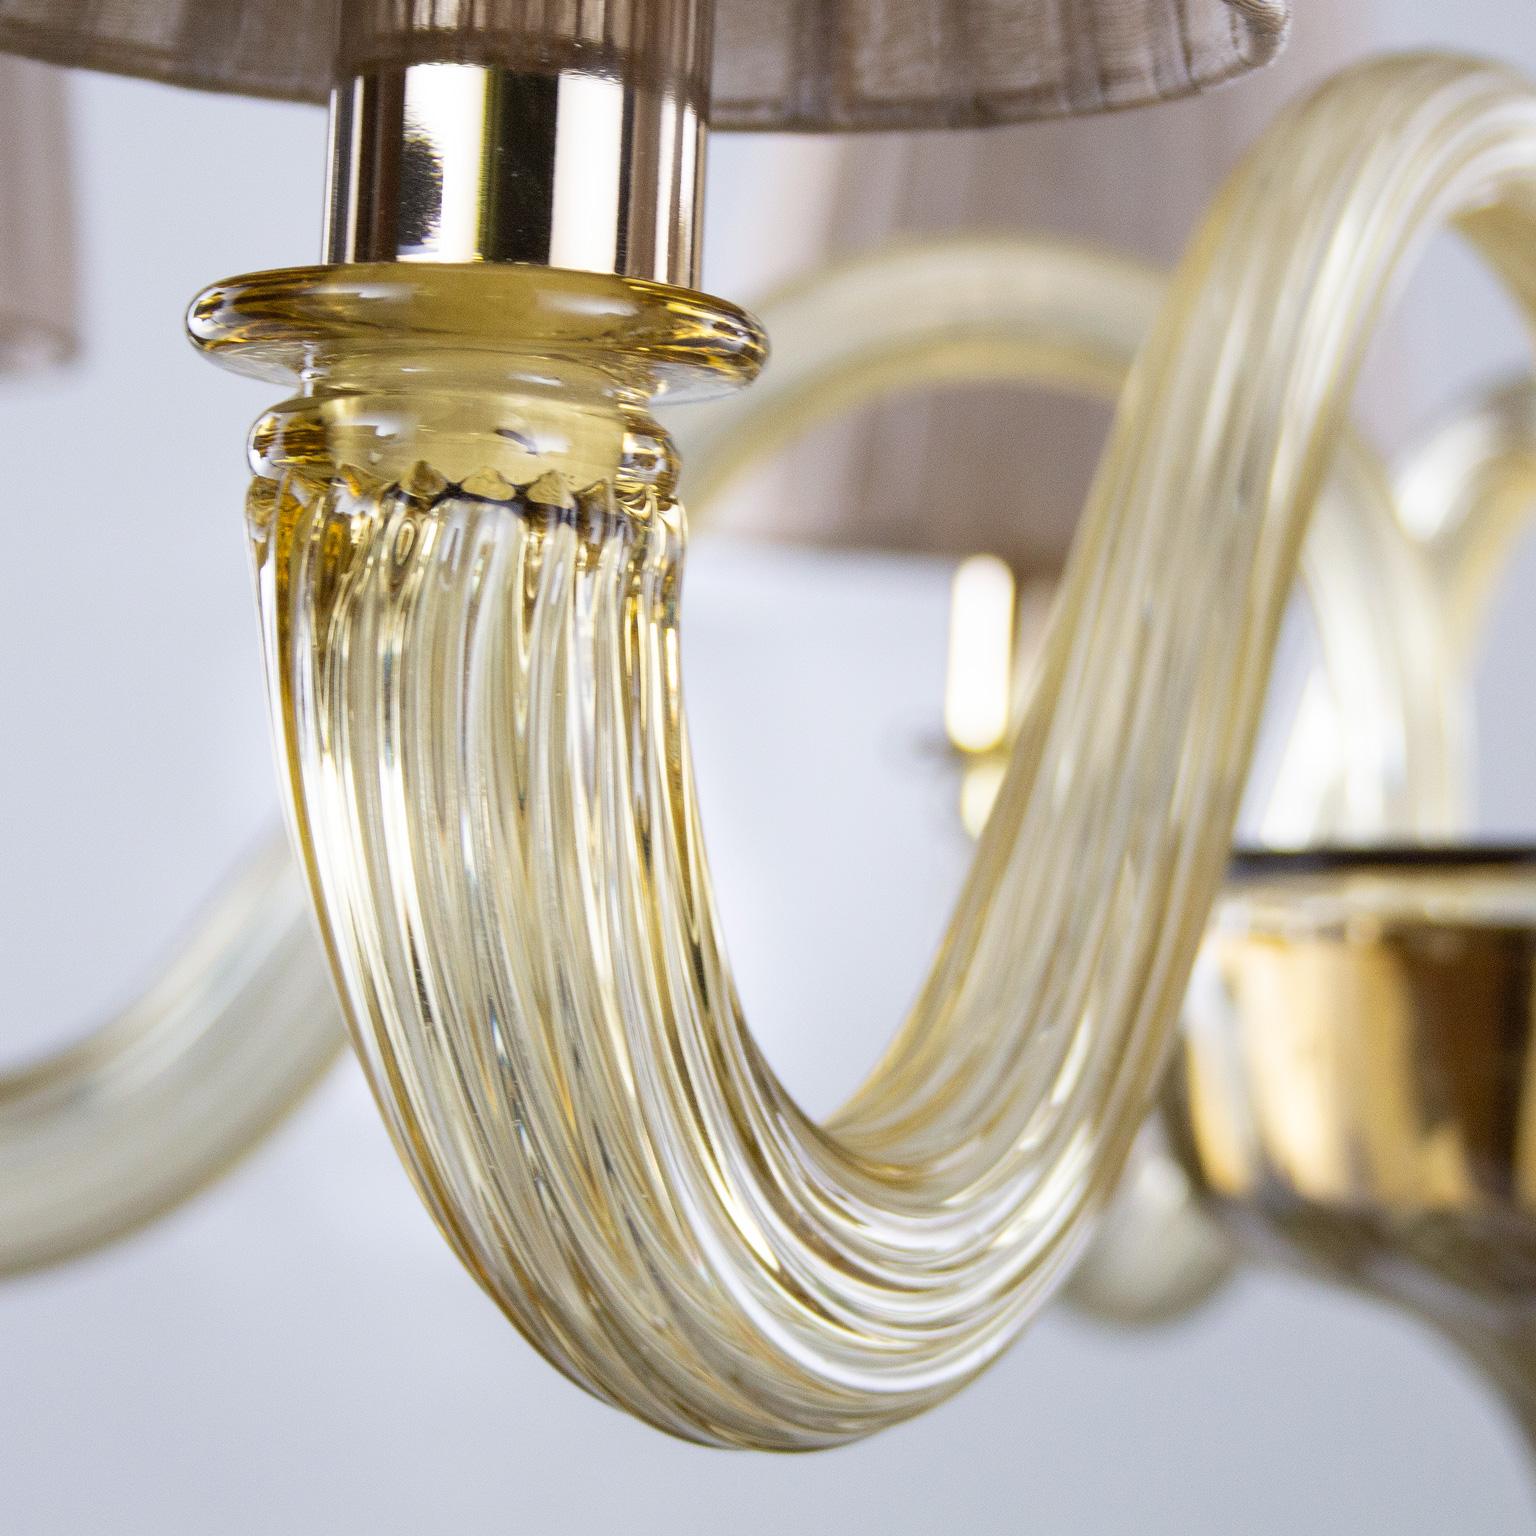 Chandelier 6 Arms Smoky Quartz Murano Glass, Lampshades Chapeau by Multiforme In New Condition For Sale In Trebaseleghe, IT